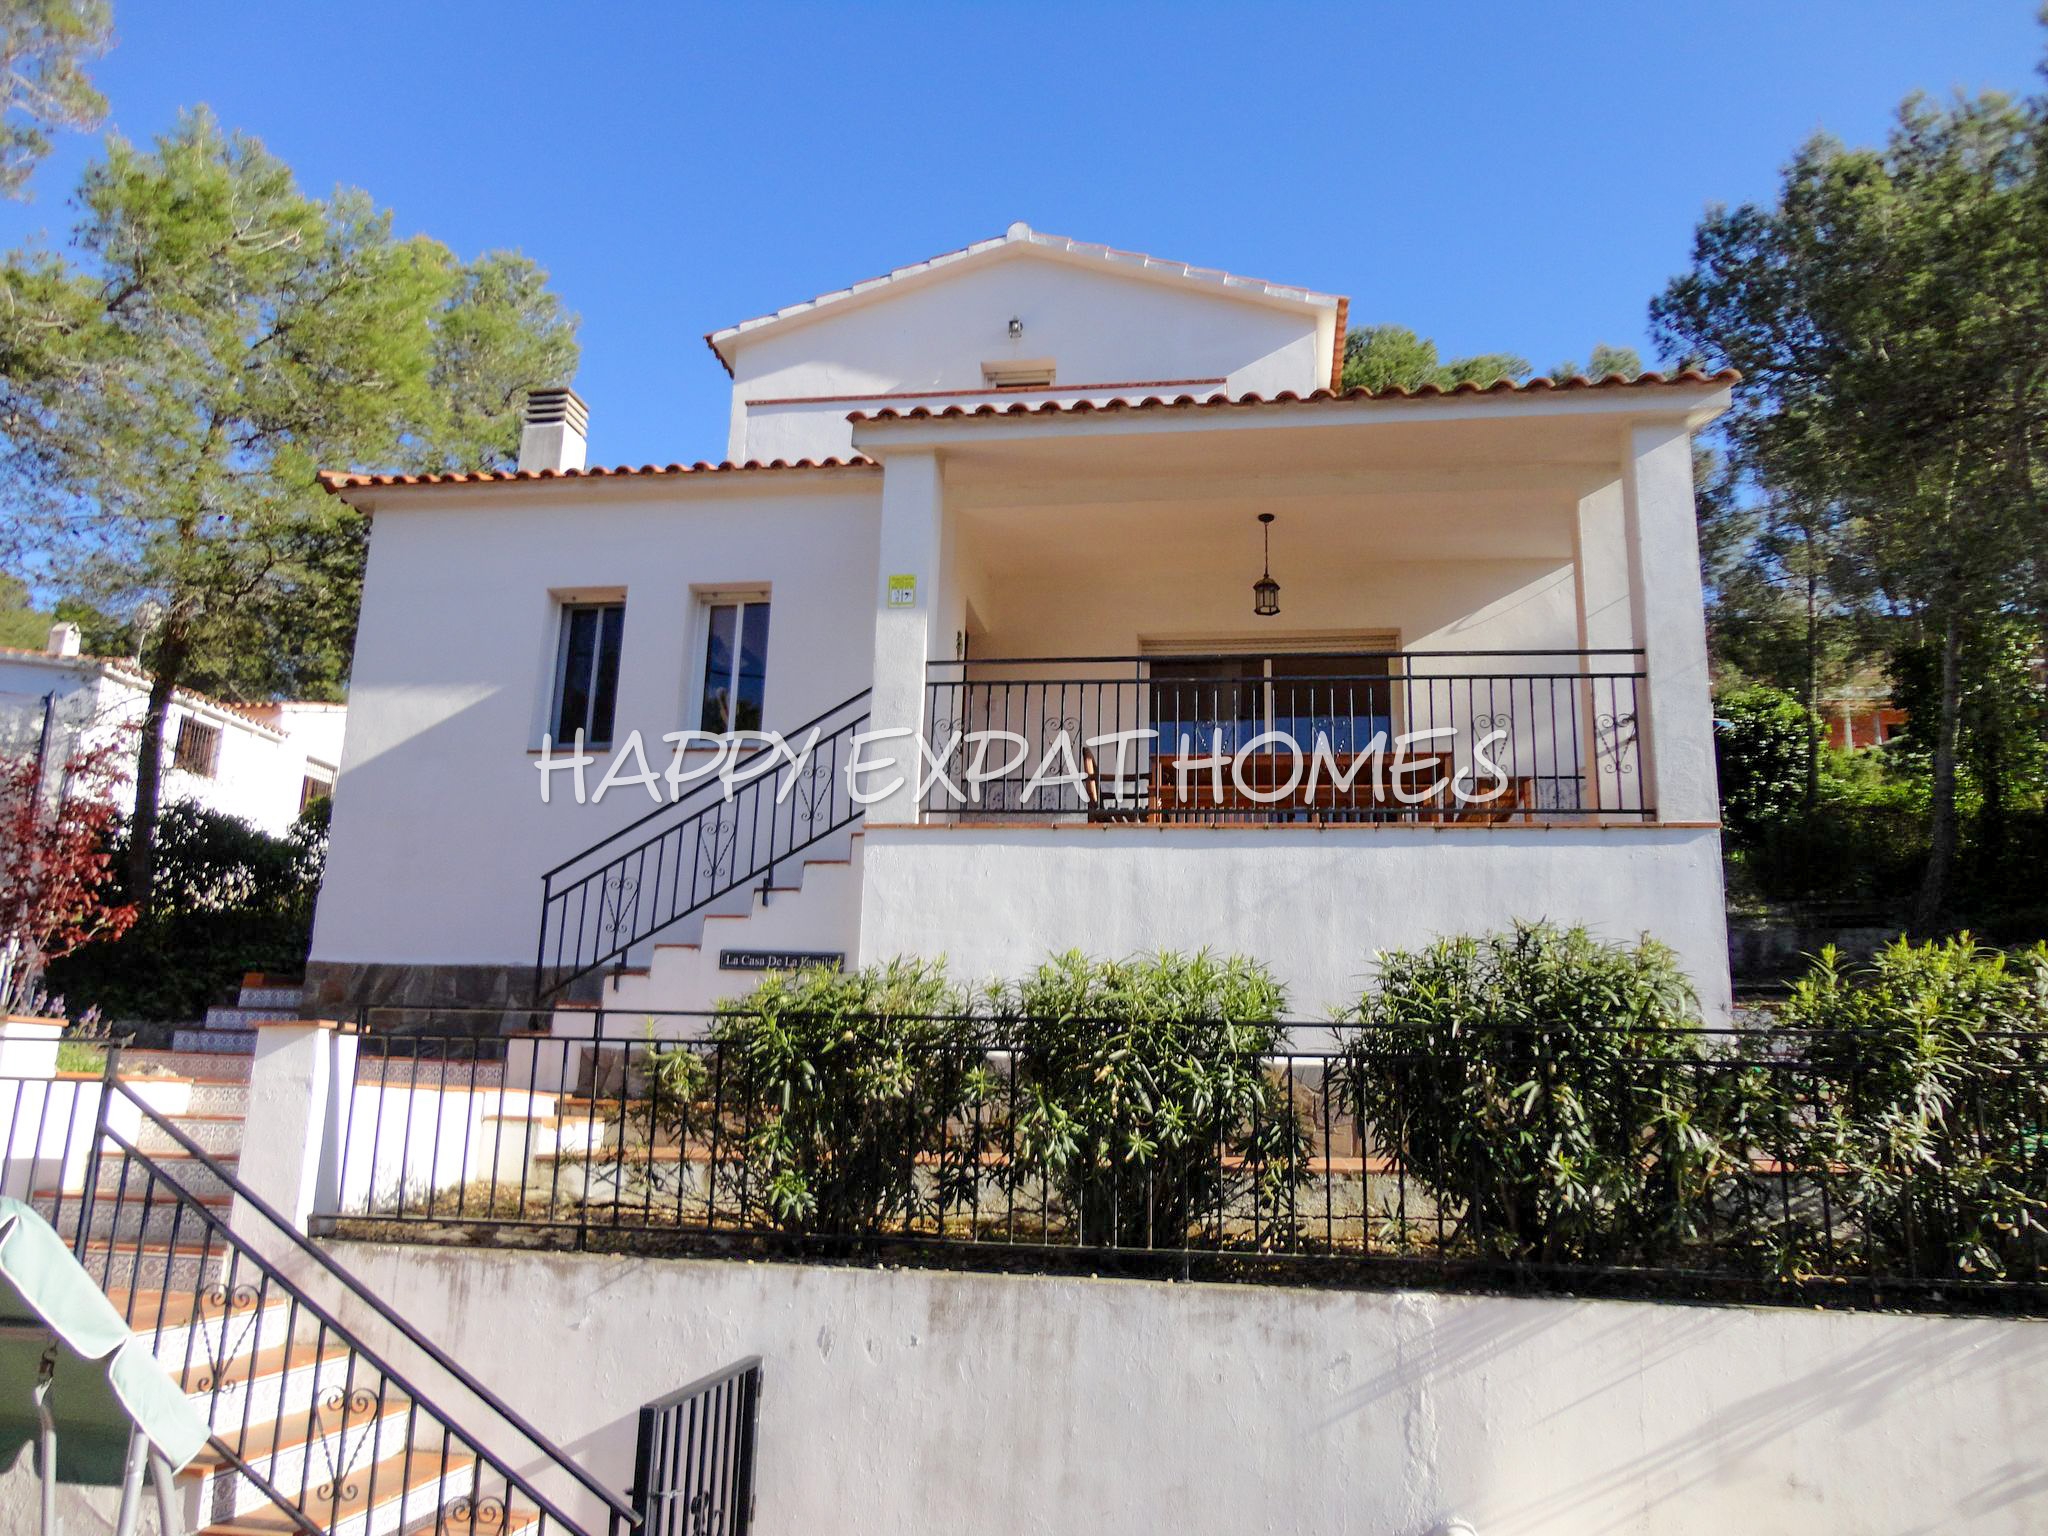 Lovely villa in the very convenient location of Mas Mestre